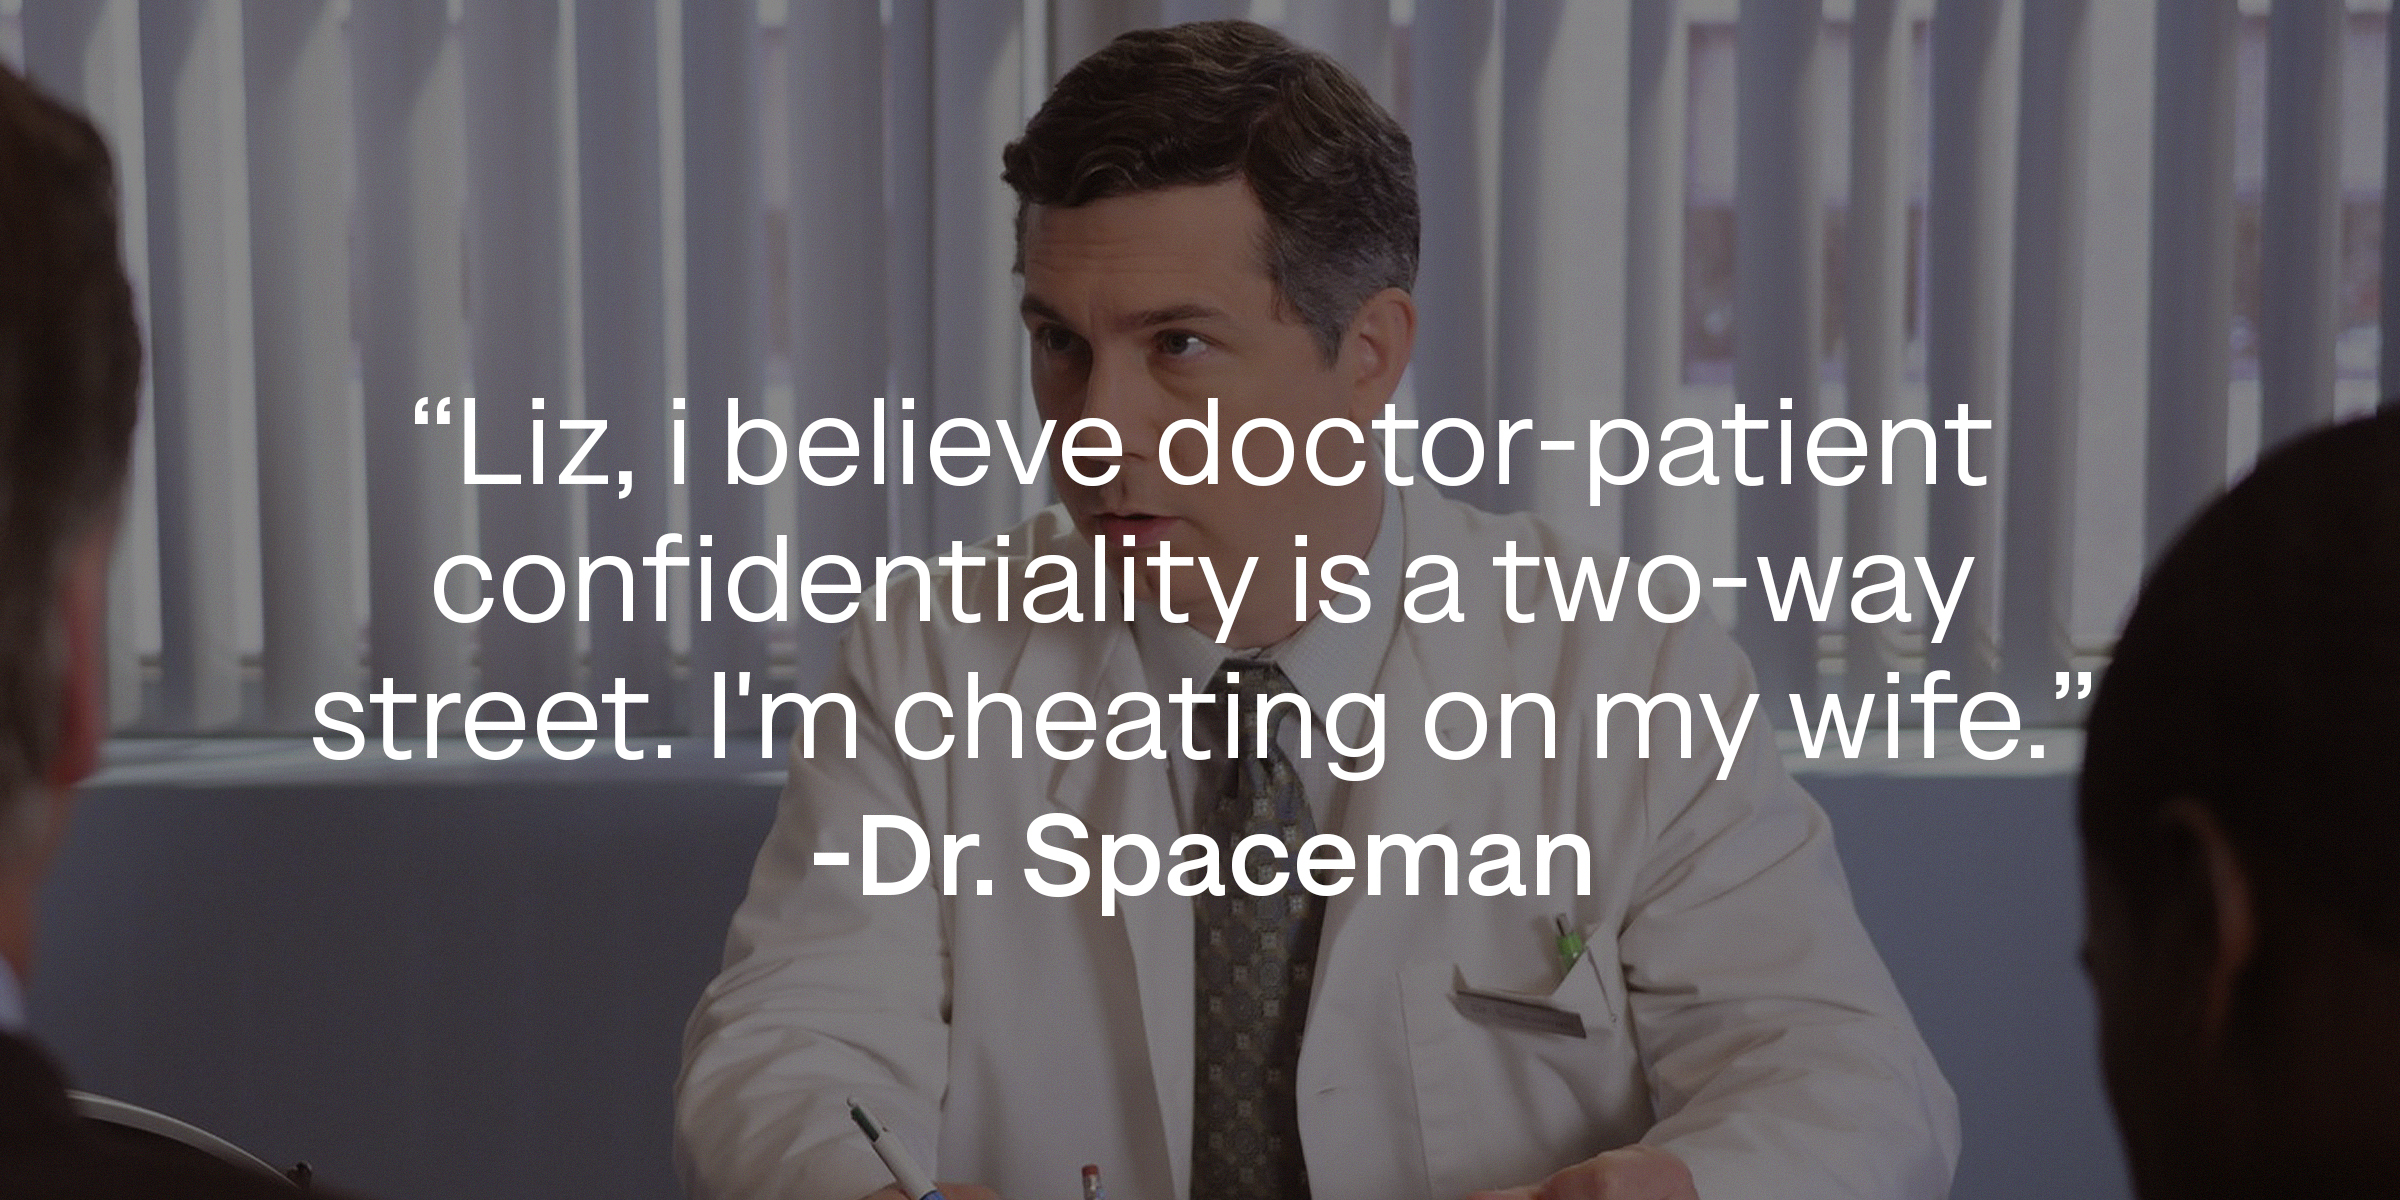 A photo of Dr.Spaceman with Dr. Spaceman's quote: "Liz, I believe doctor-patient confidentiality is a two-way street. I'm cheating on my wife." | Source: facebook.com/30RockTV